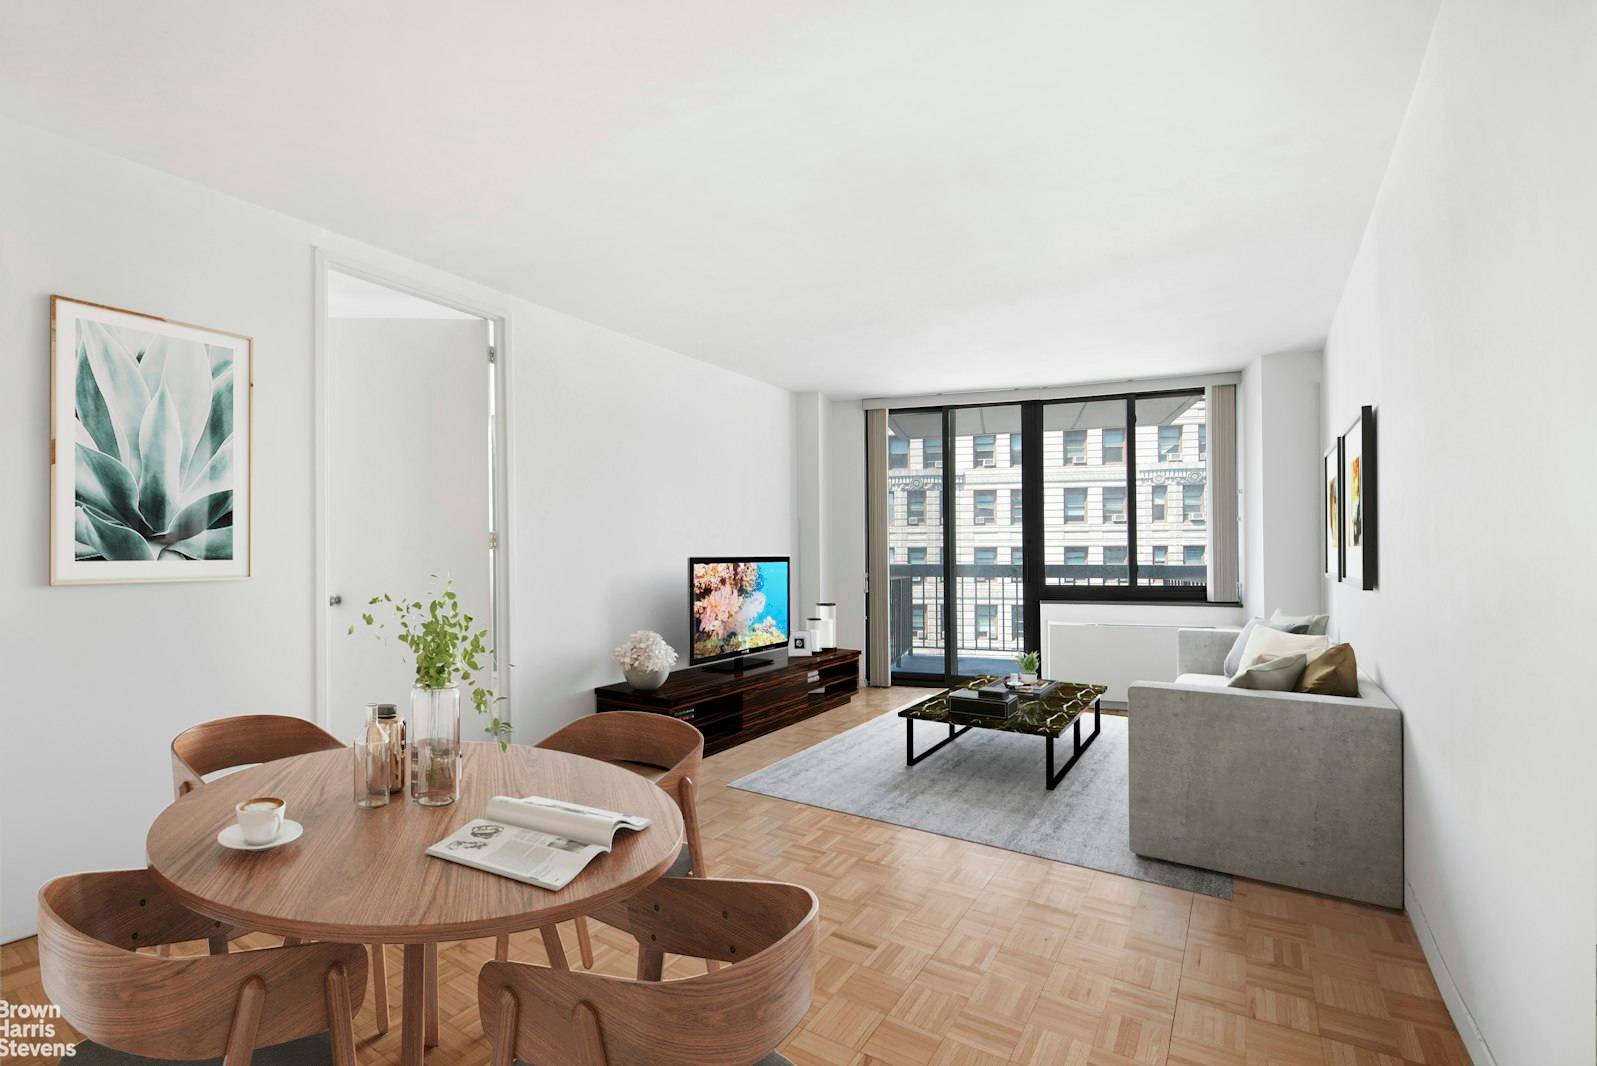 Madison Green Condominium is perched at the foot of Madison Square Park the beautiful jewel of the city.